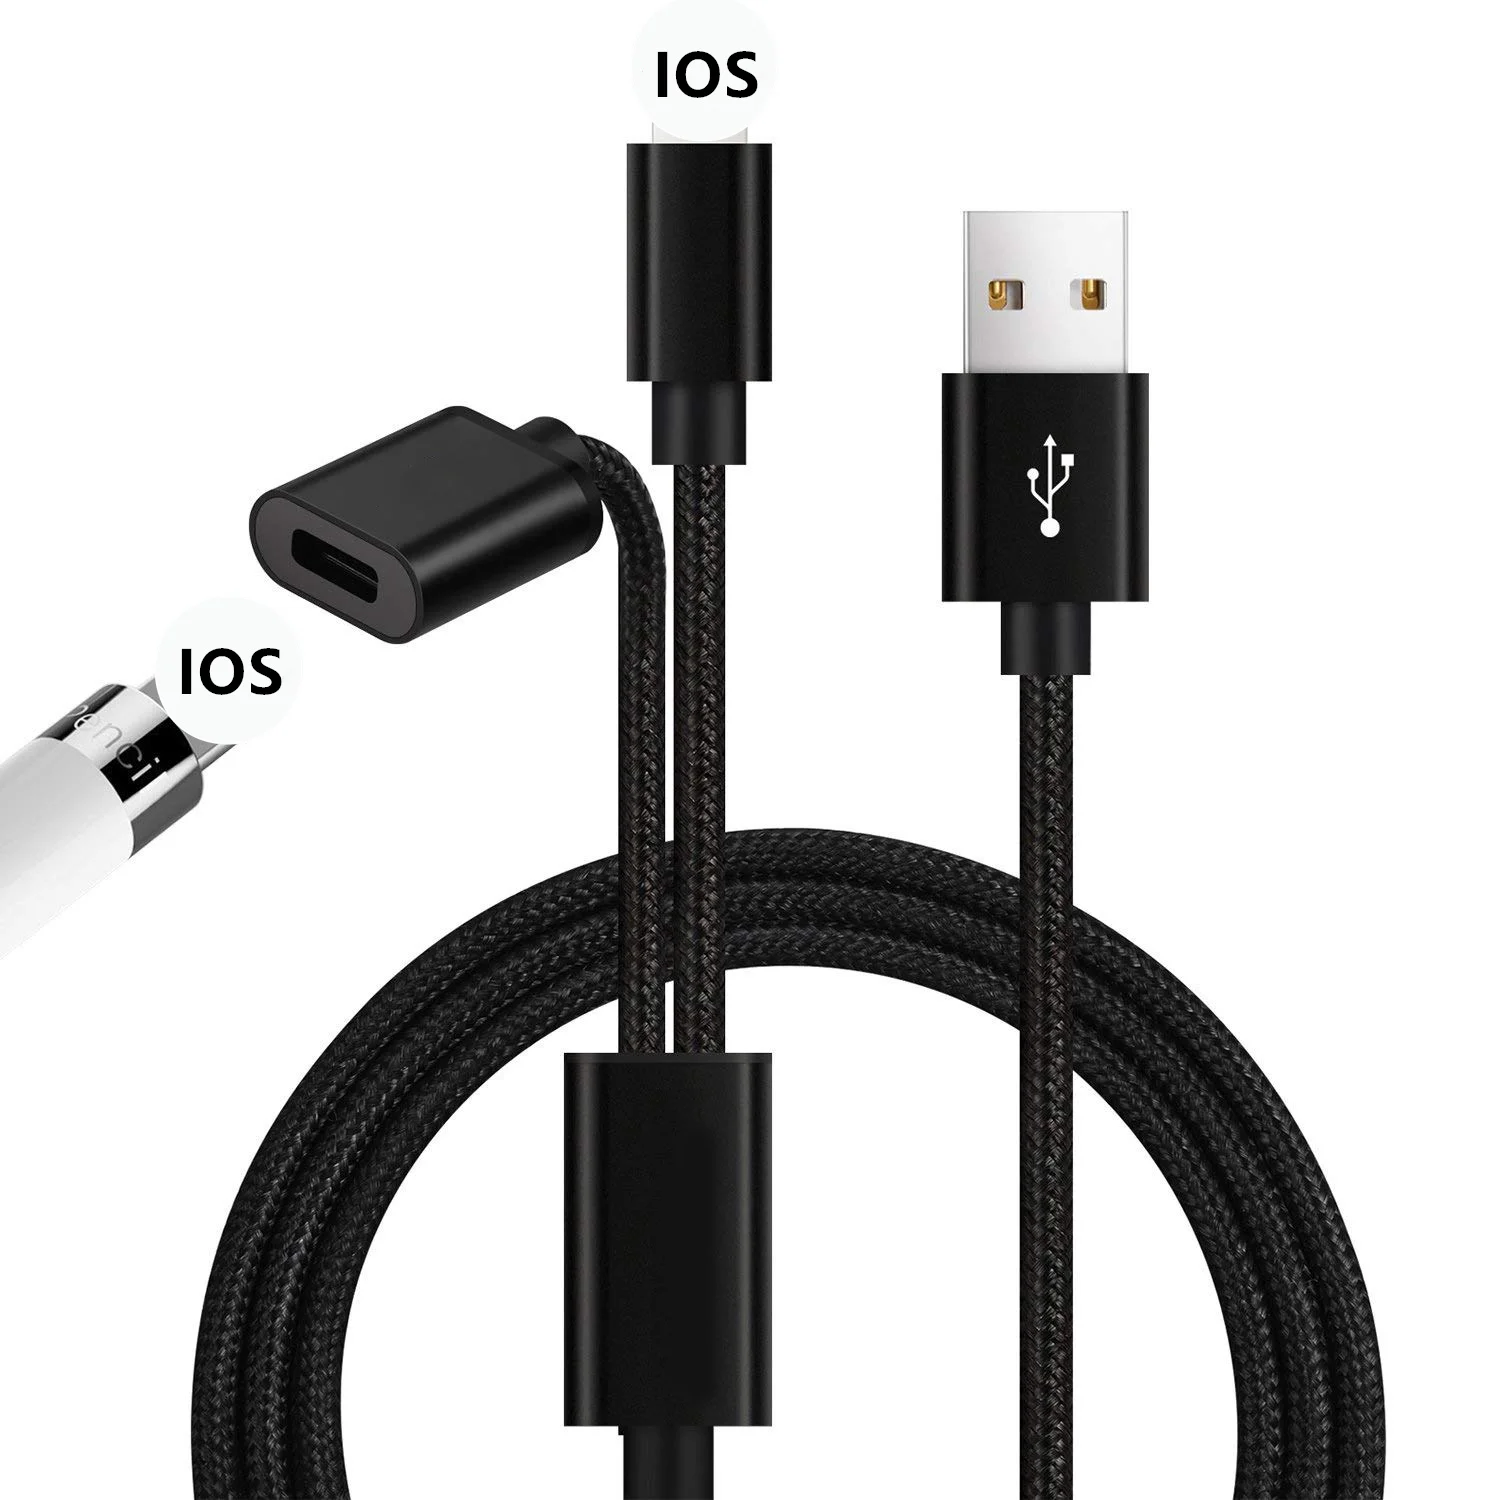 

YSAGi 2 in 1 iPad Pencil USB Nylon Braided Charging Cable Adapter for iPad Pro 9.7"10.5" 12.9" Pencil iPhone X 8 7 6s Data Cable